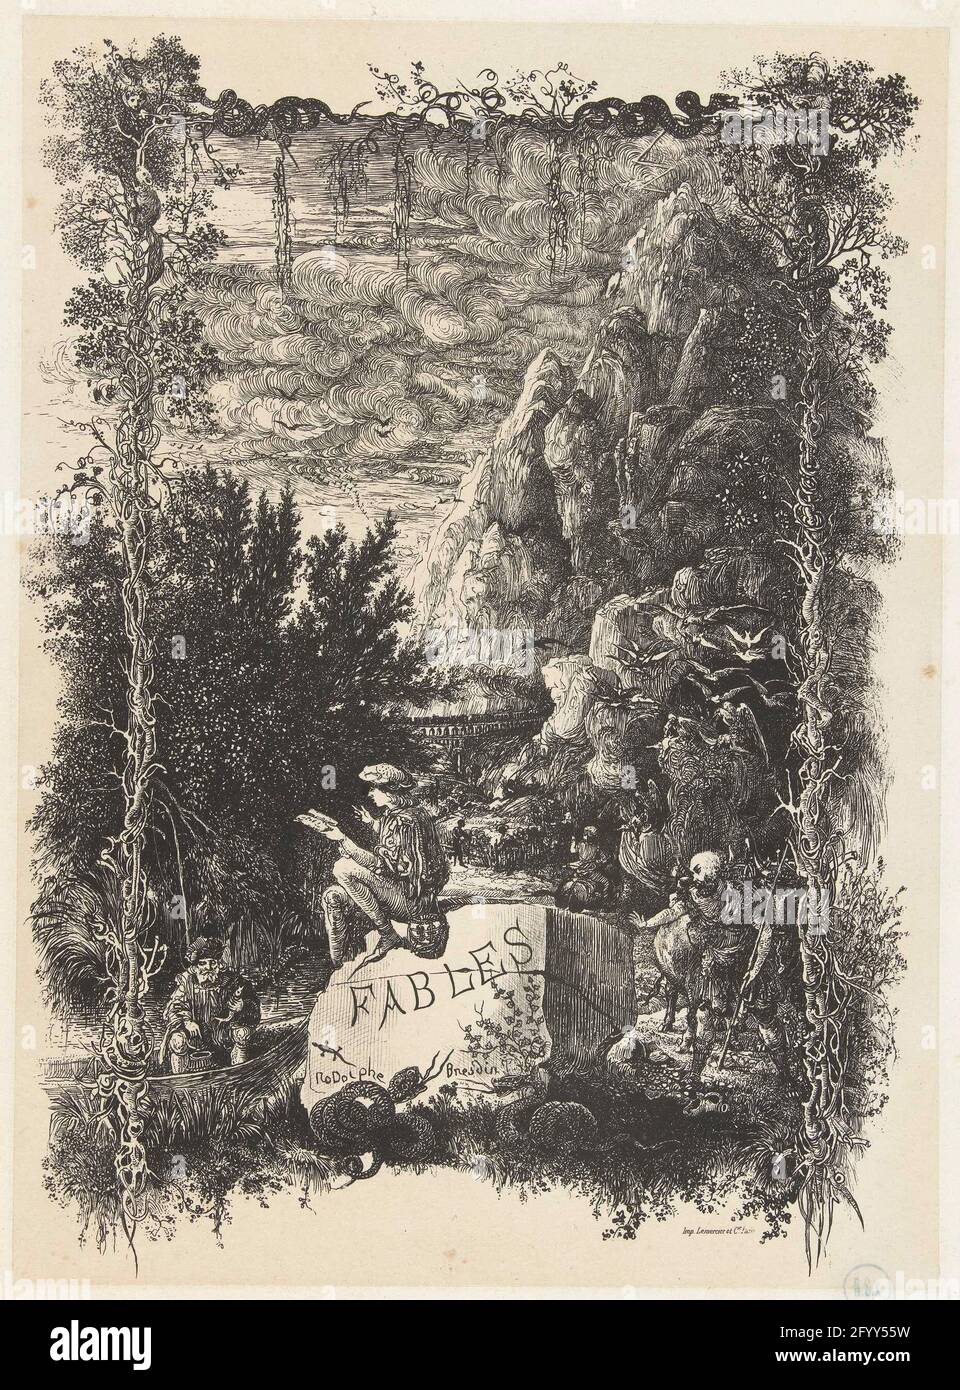 Title print with landscape and figures from fables and stories in frame with plants and hoses; Frontispice Fables et Contes. Title Print with a landscape in which various figures are placed that occur in the fables and stories in the book for which this illustration was designed. On a large stone with the text Fables is a young man with a book. Right a man runs with a beef and he finds a broken jug and their contents. On the left is a man in a boat to fish. Birds or bats fly from a cave. In the background a rock rises high and a train disappears into a tunnel. The rectangular frame is made up Stock Photo